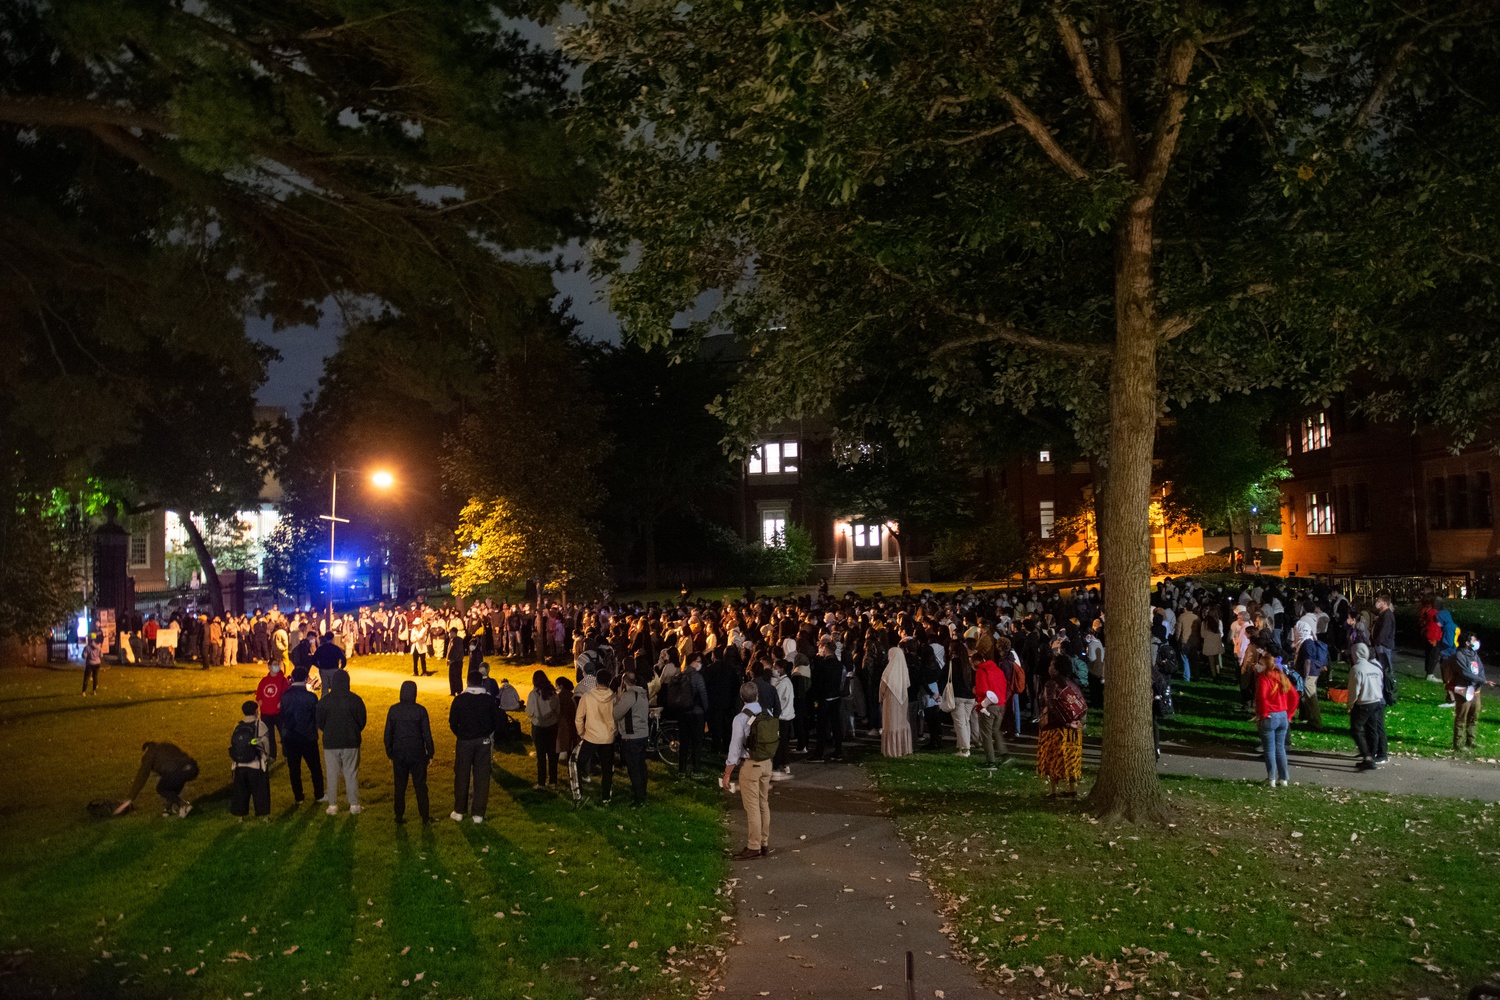 At a silent vigil Thursday evening, students and affiliates gathered to mourn civilian deaths in Gaza and Israel.